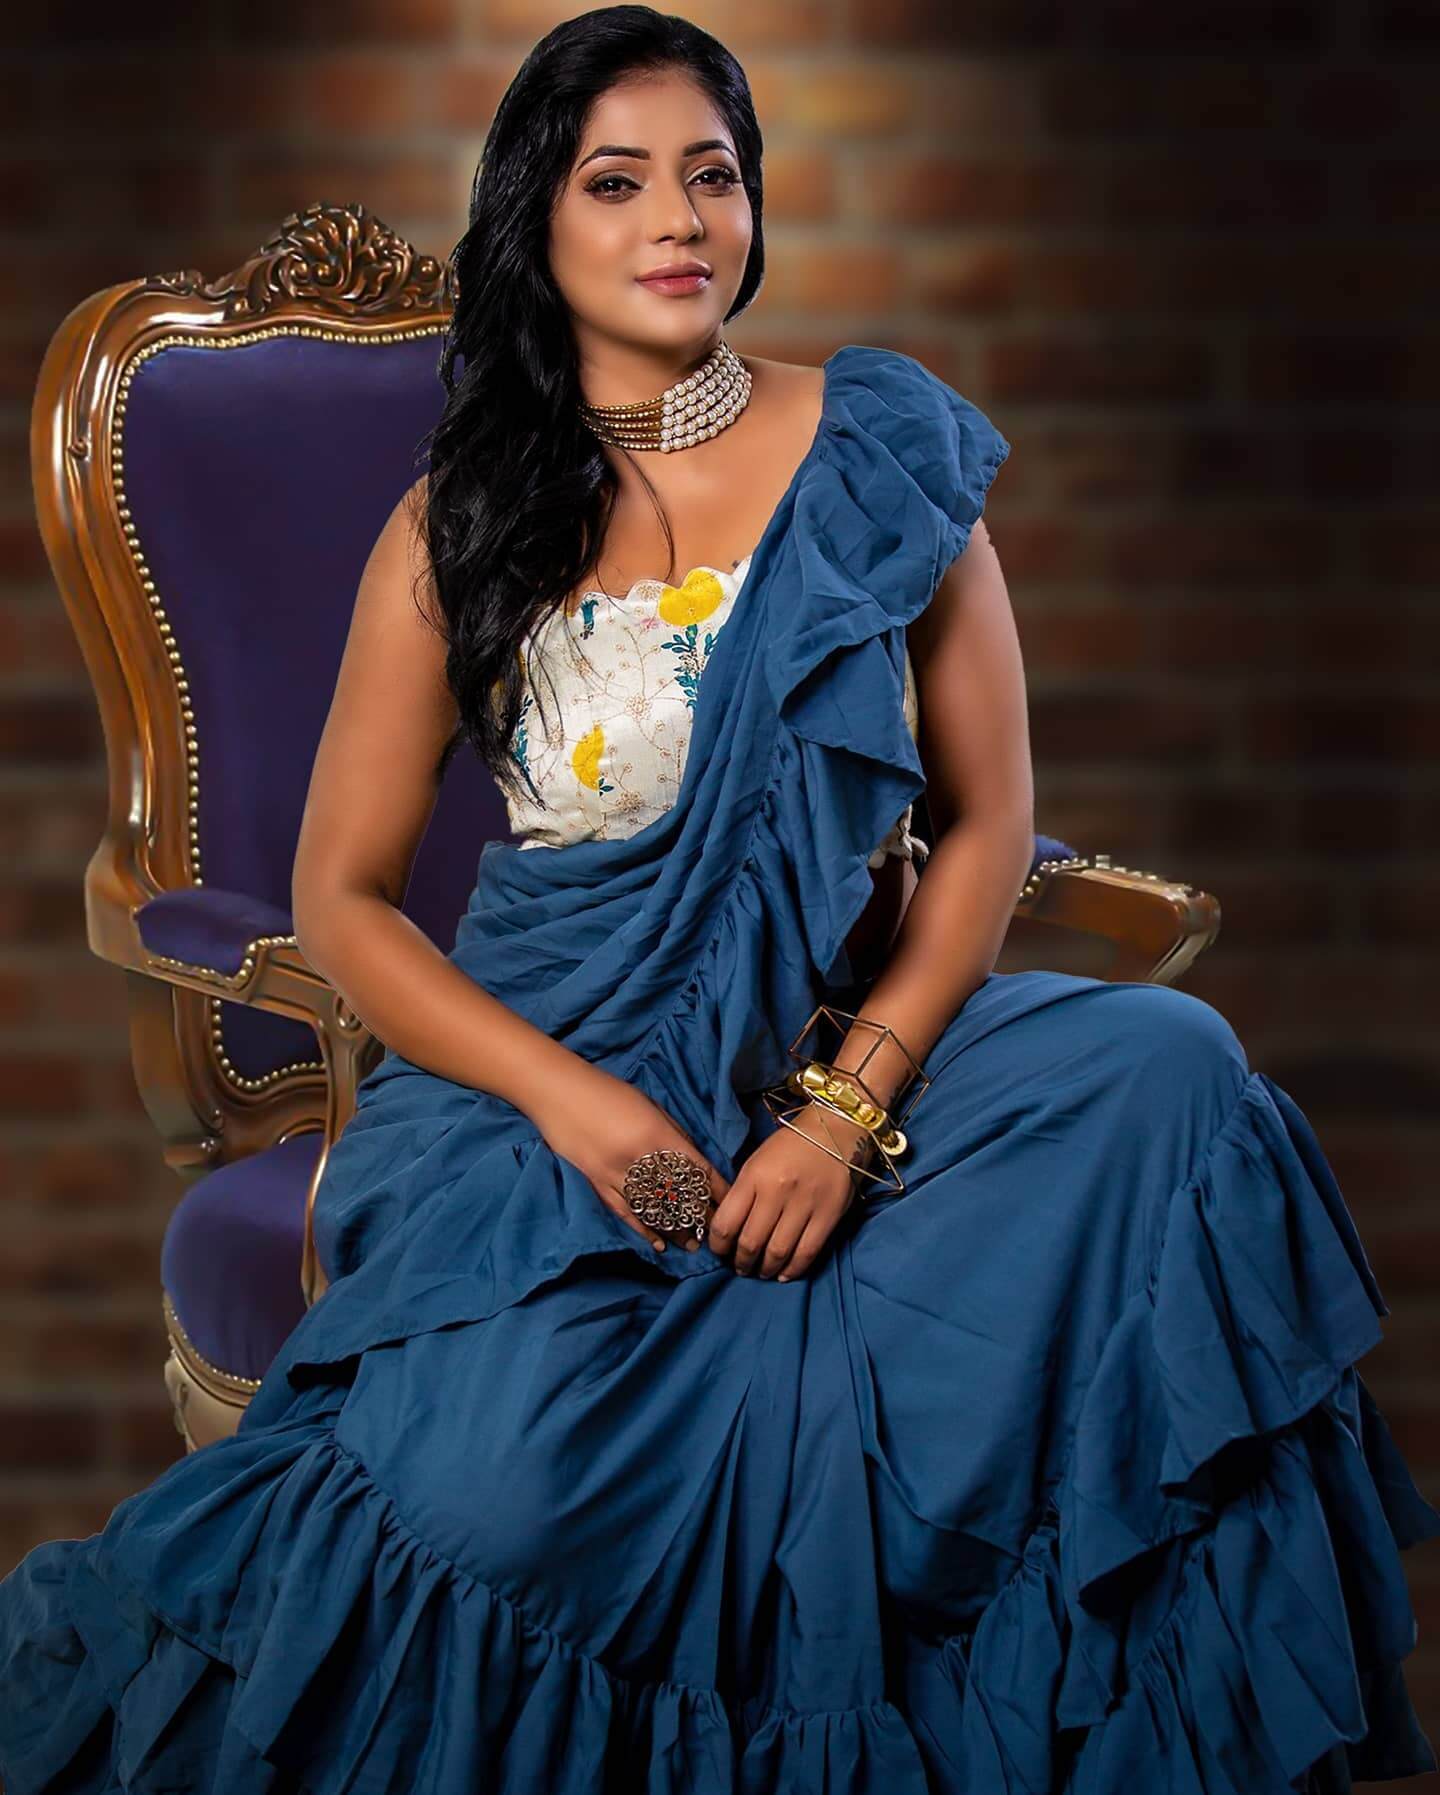 Reshma Pasupuleti Flattering Look In Blue Ruffled Cotton Saree With White Blouse 